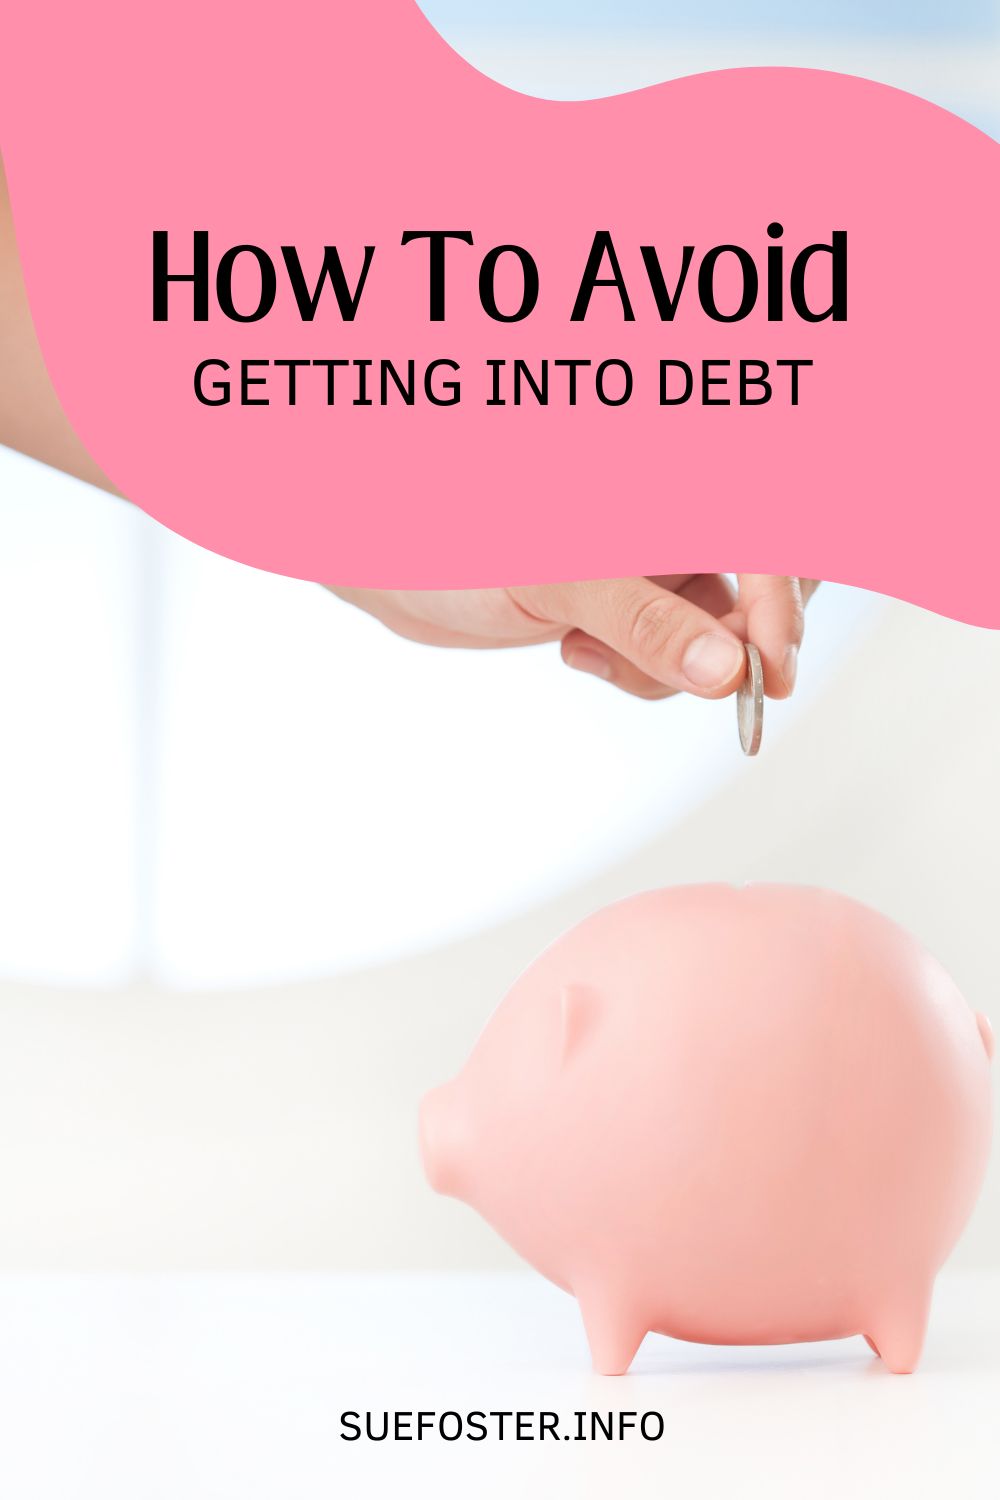 Master practical strategies to avoid debt and manage your finances effectively.